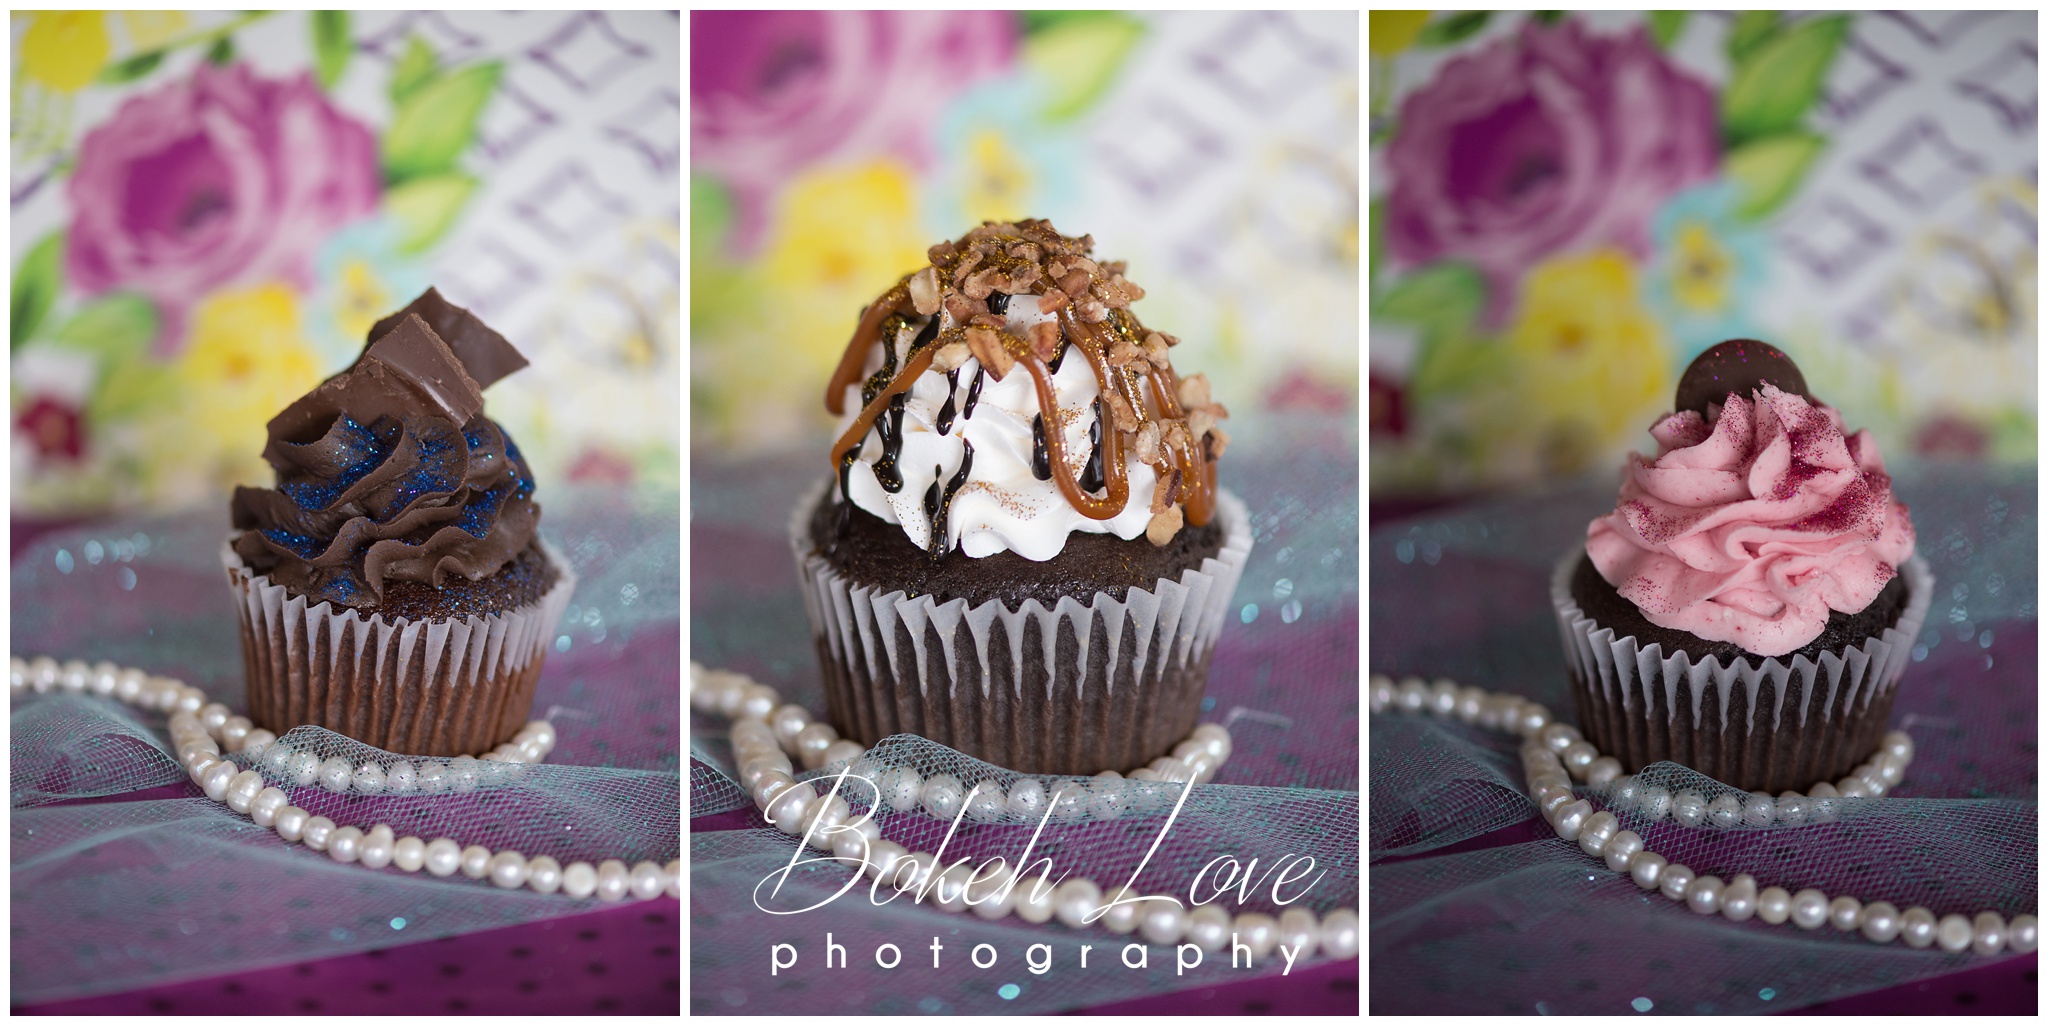 Product photography for local businesses, simple sweet cupcakes, egg harbor city photographer, galloway photographer, absecon photographer, atlantic city photographer, philly photographer, product photography, nj product photography, nj product photographer, new jersey photographer, new jersey business photographer, south jersey photographer, south jersey product photographer, south jersey business photographer, cupcakes, cupcake photos, website photography, business photography, bokeh love photography